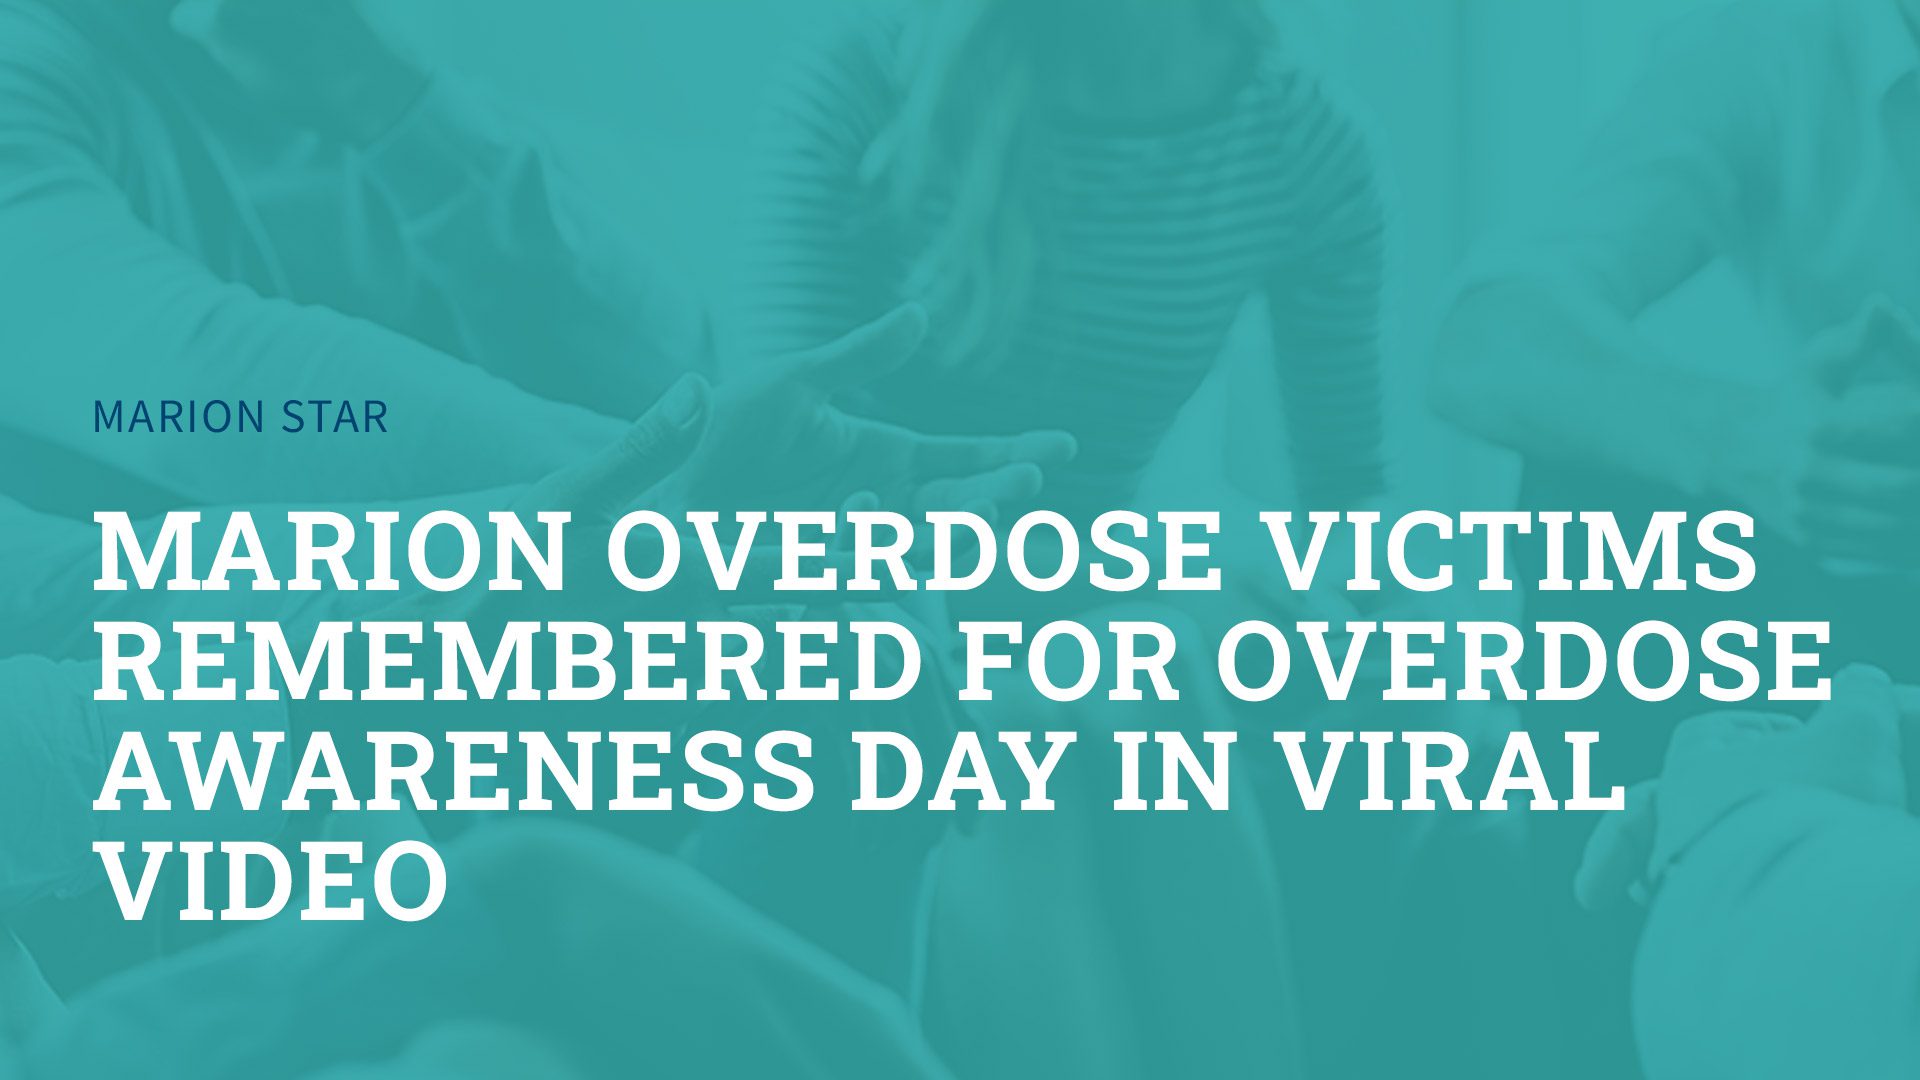 Marion overdose victims remembered for Overdose Awareness Day in viral video